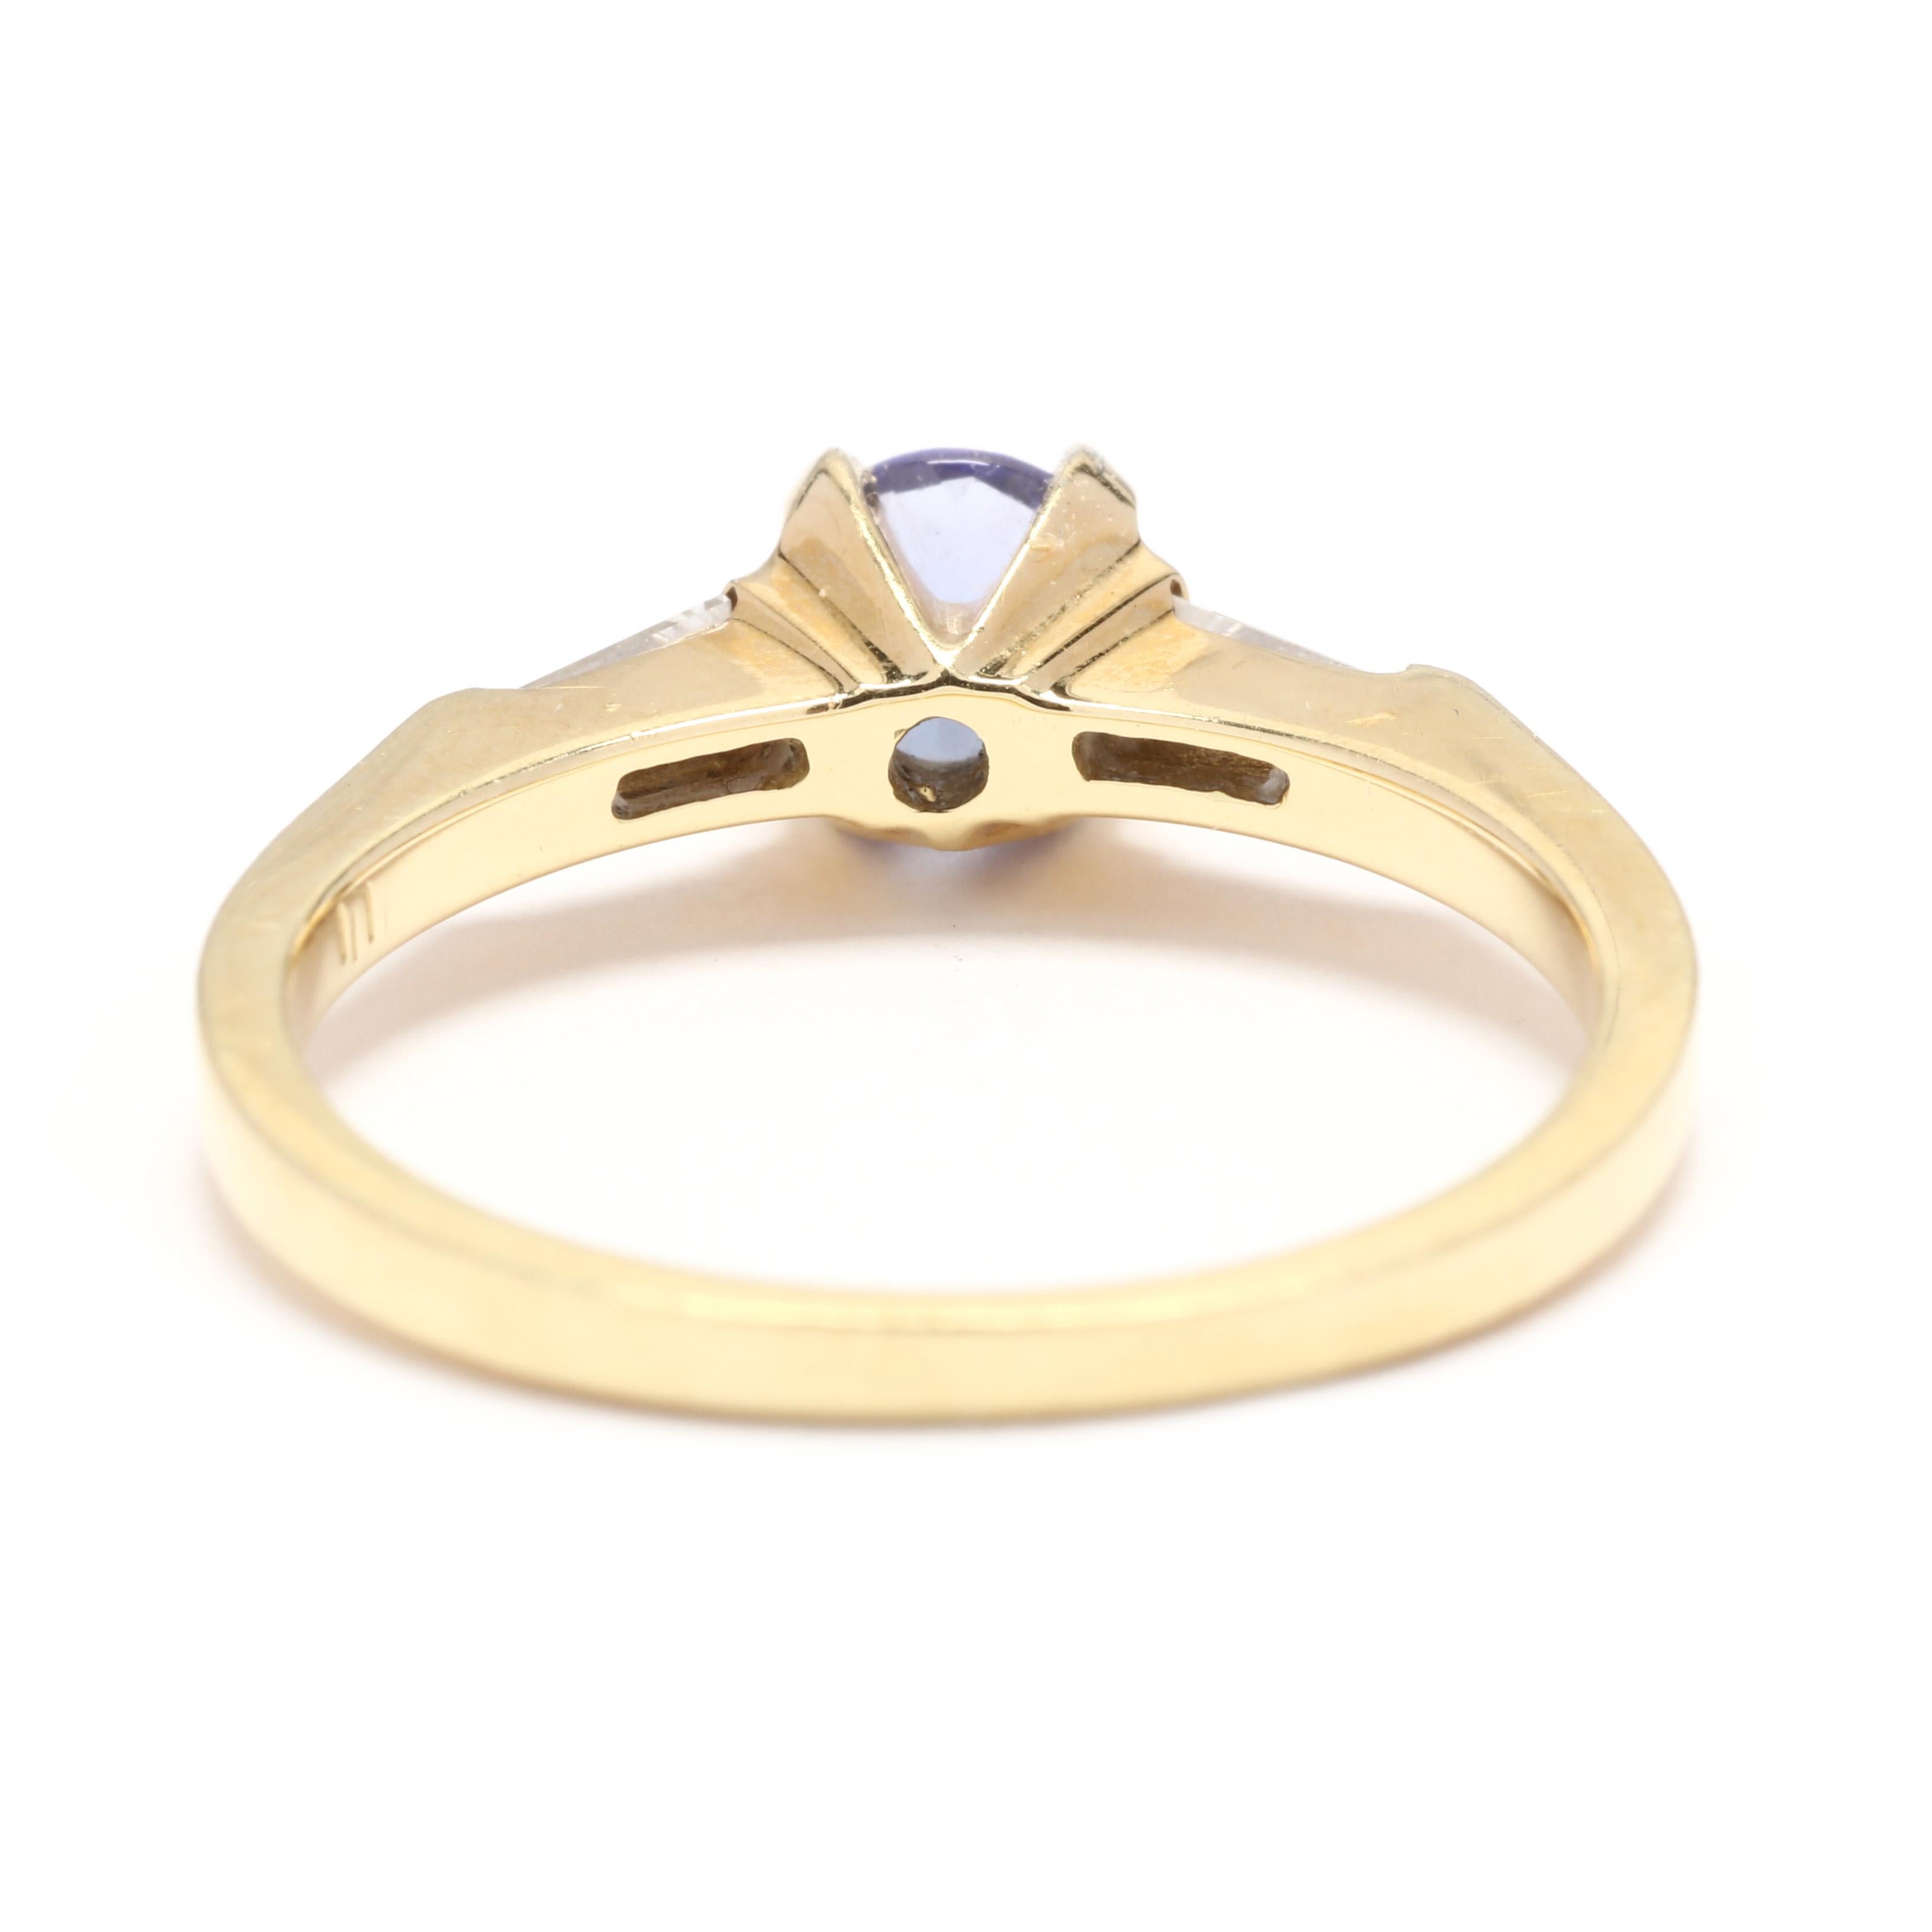 A vintage 18 karat yellow gold sapphire and diamond ring. This three stone ring features a prong set round cut sapphire weighing approximately .60 carat with a tapered baguette cut diamond on either side weighing approximately .16 total carats and a